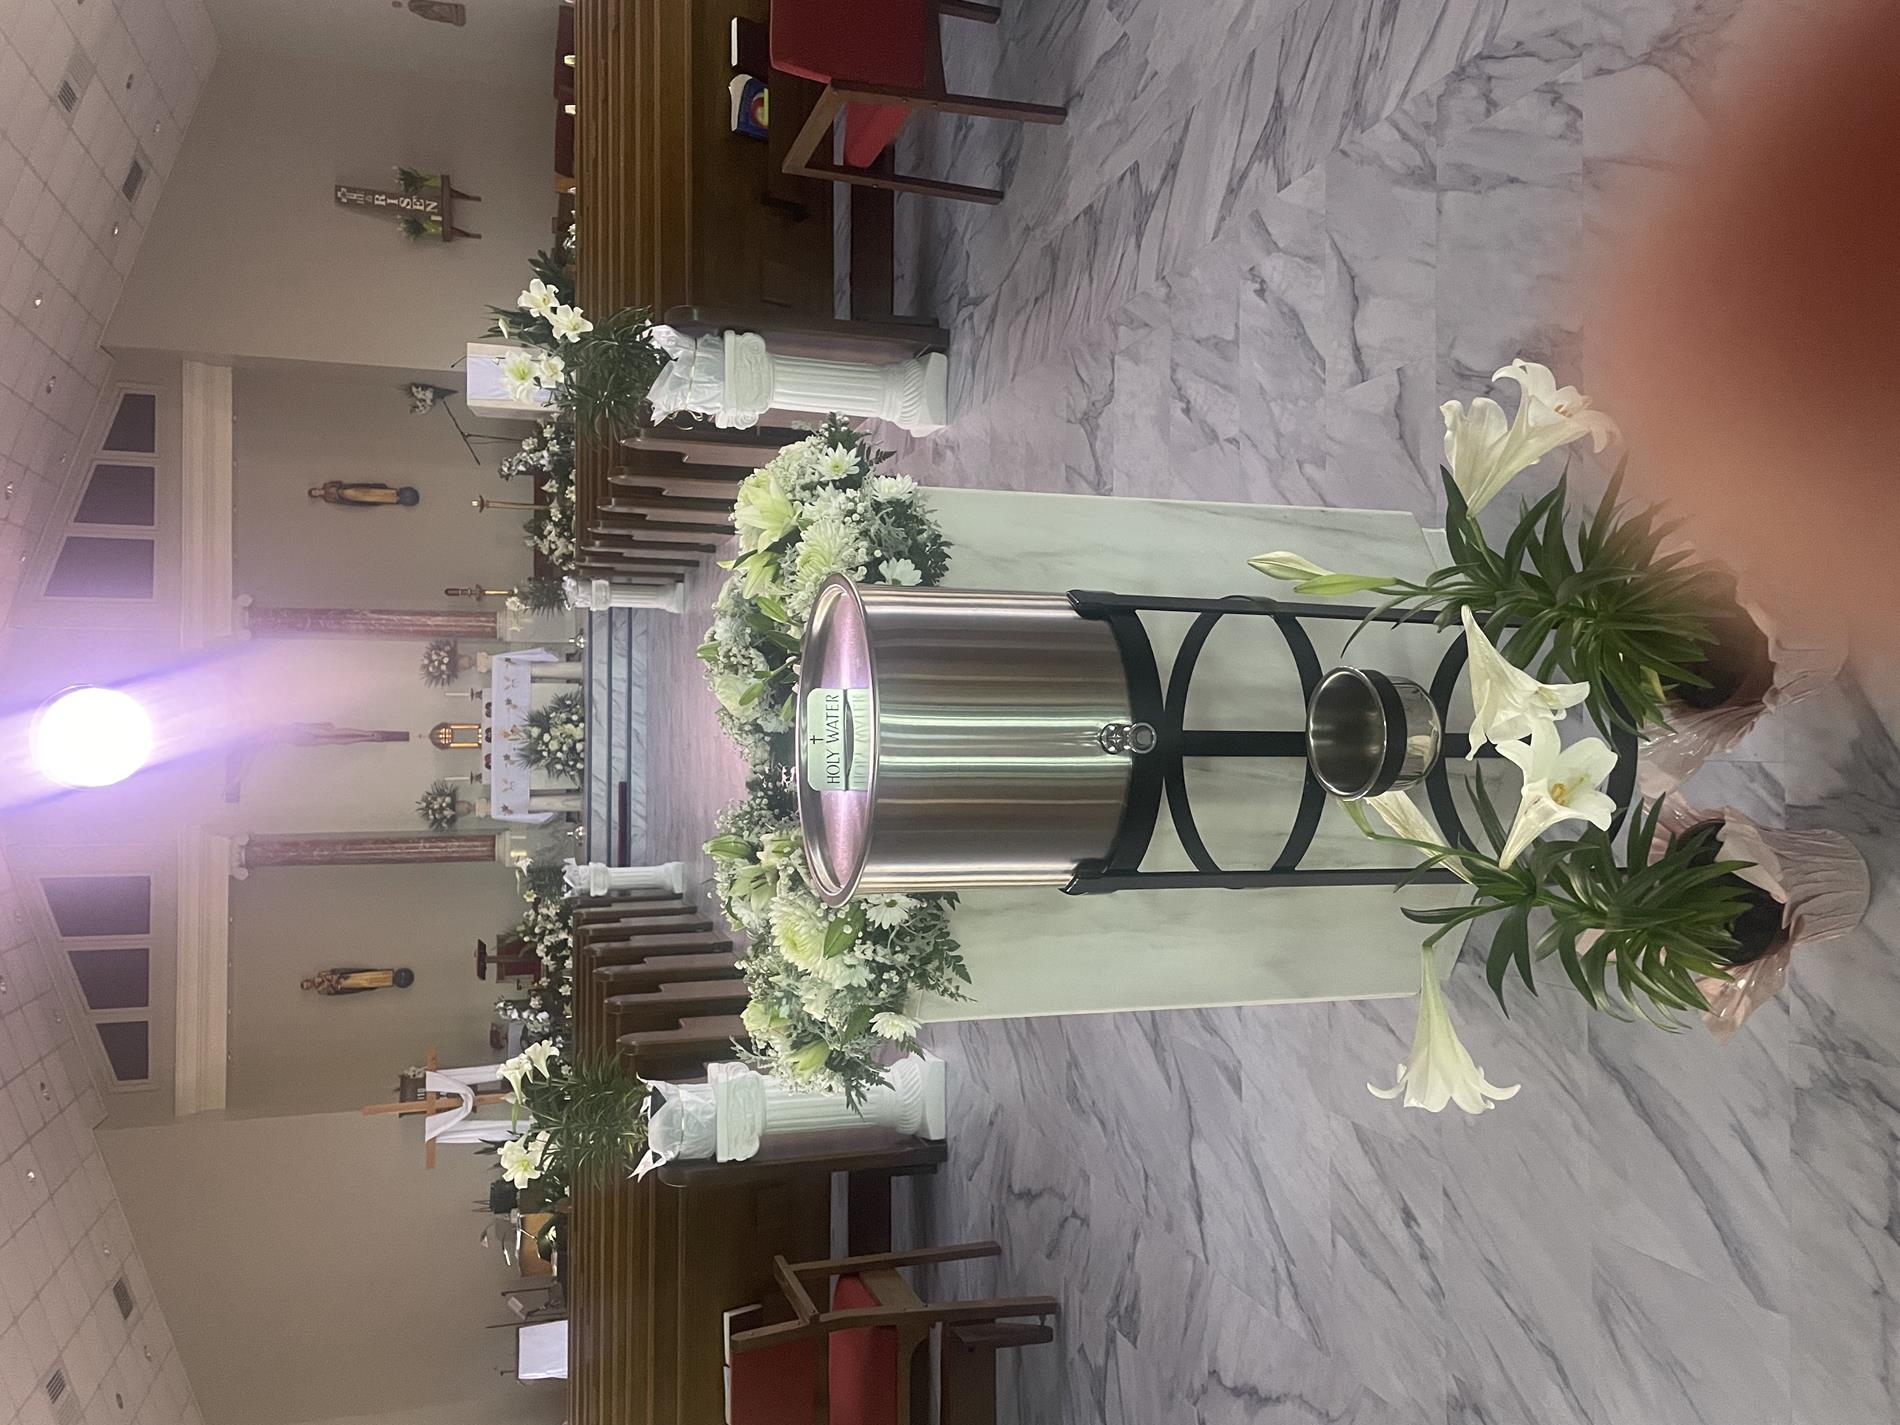 Holy Water and Baptismal font beautifully decorated